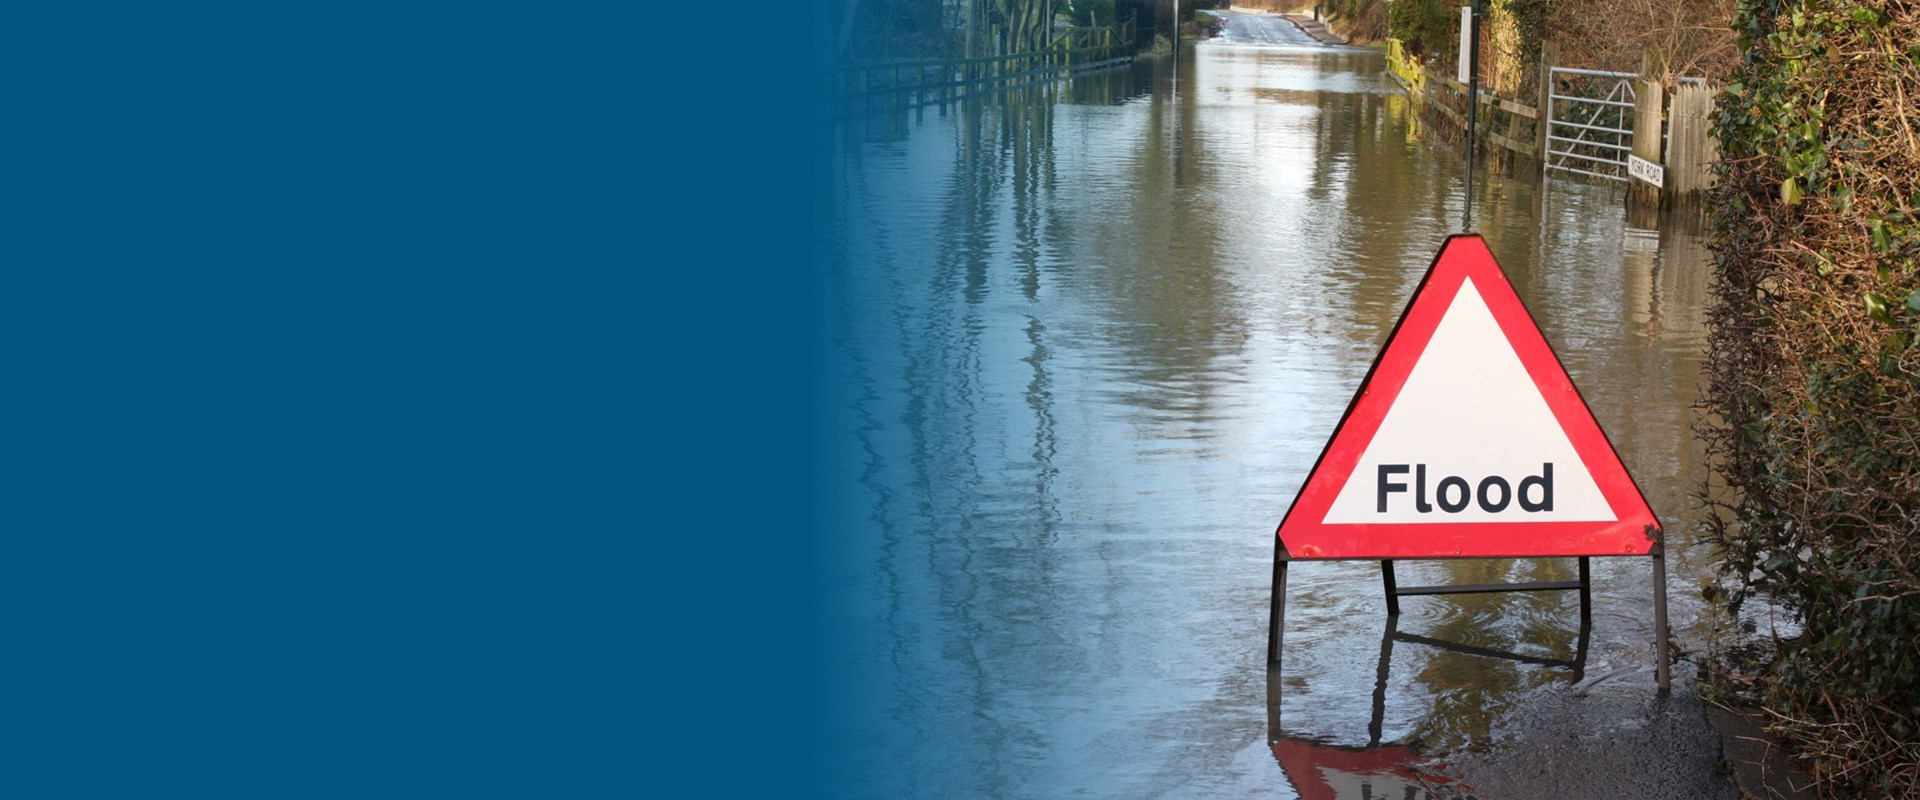 An image of a flood sign in the street with flooding around it